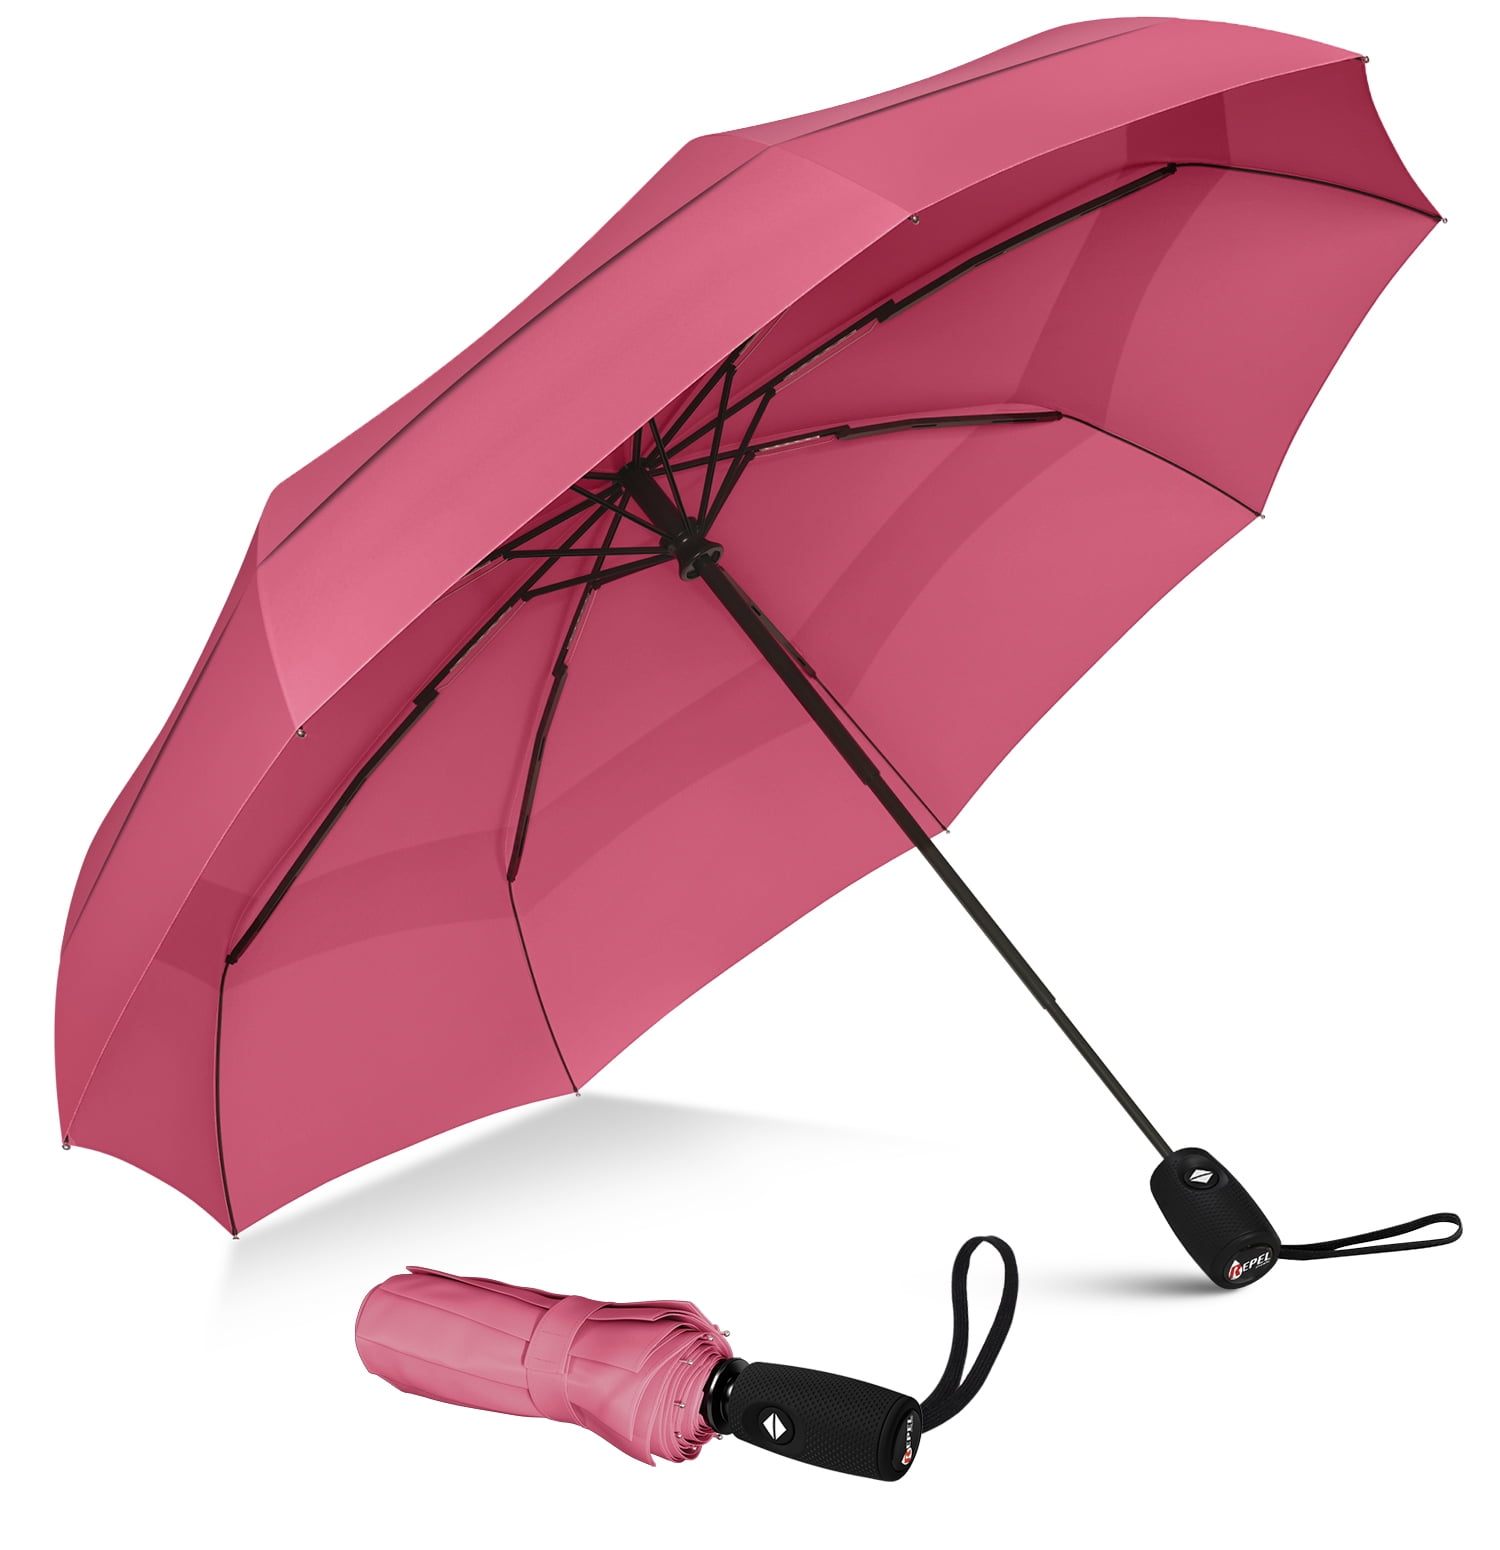 Reinforced Windproof Frame Compact Dupont Teflon Fast Drying Travel Umbrella 